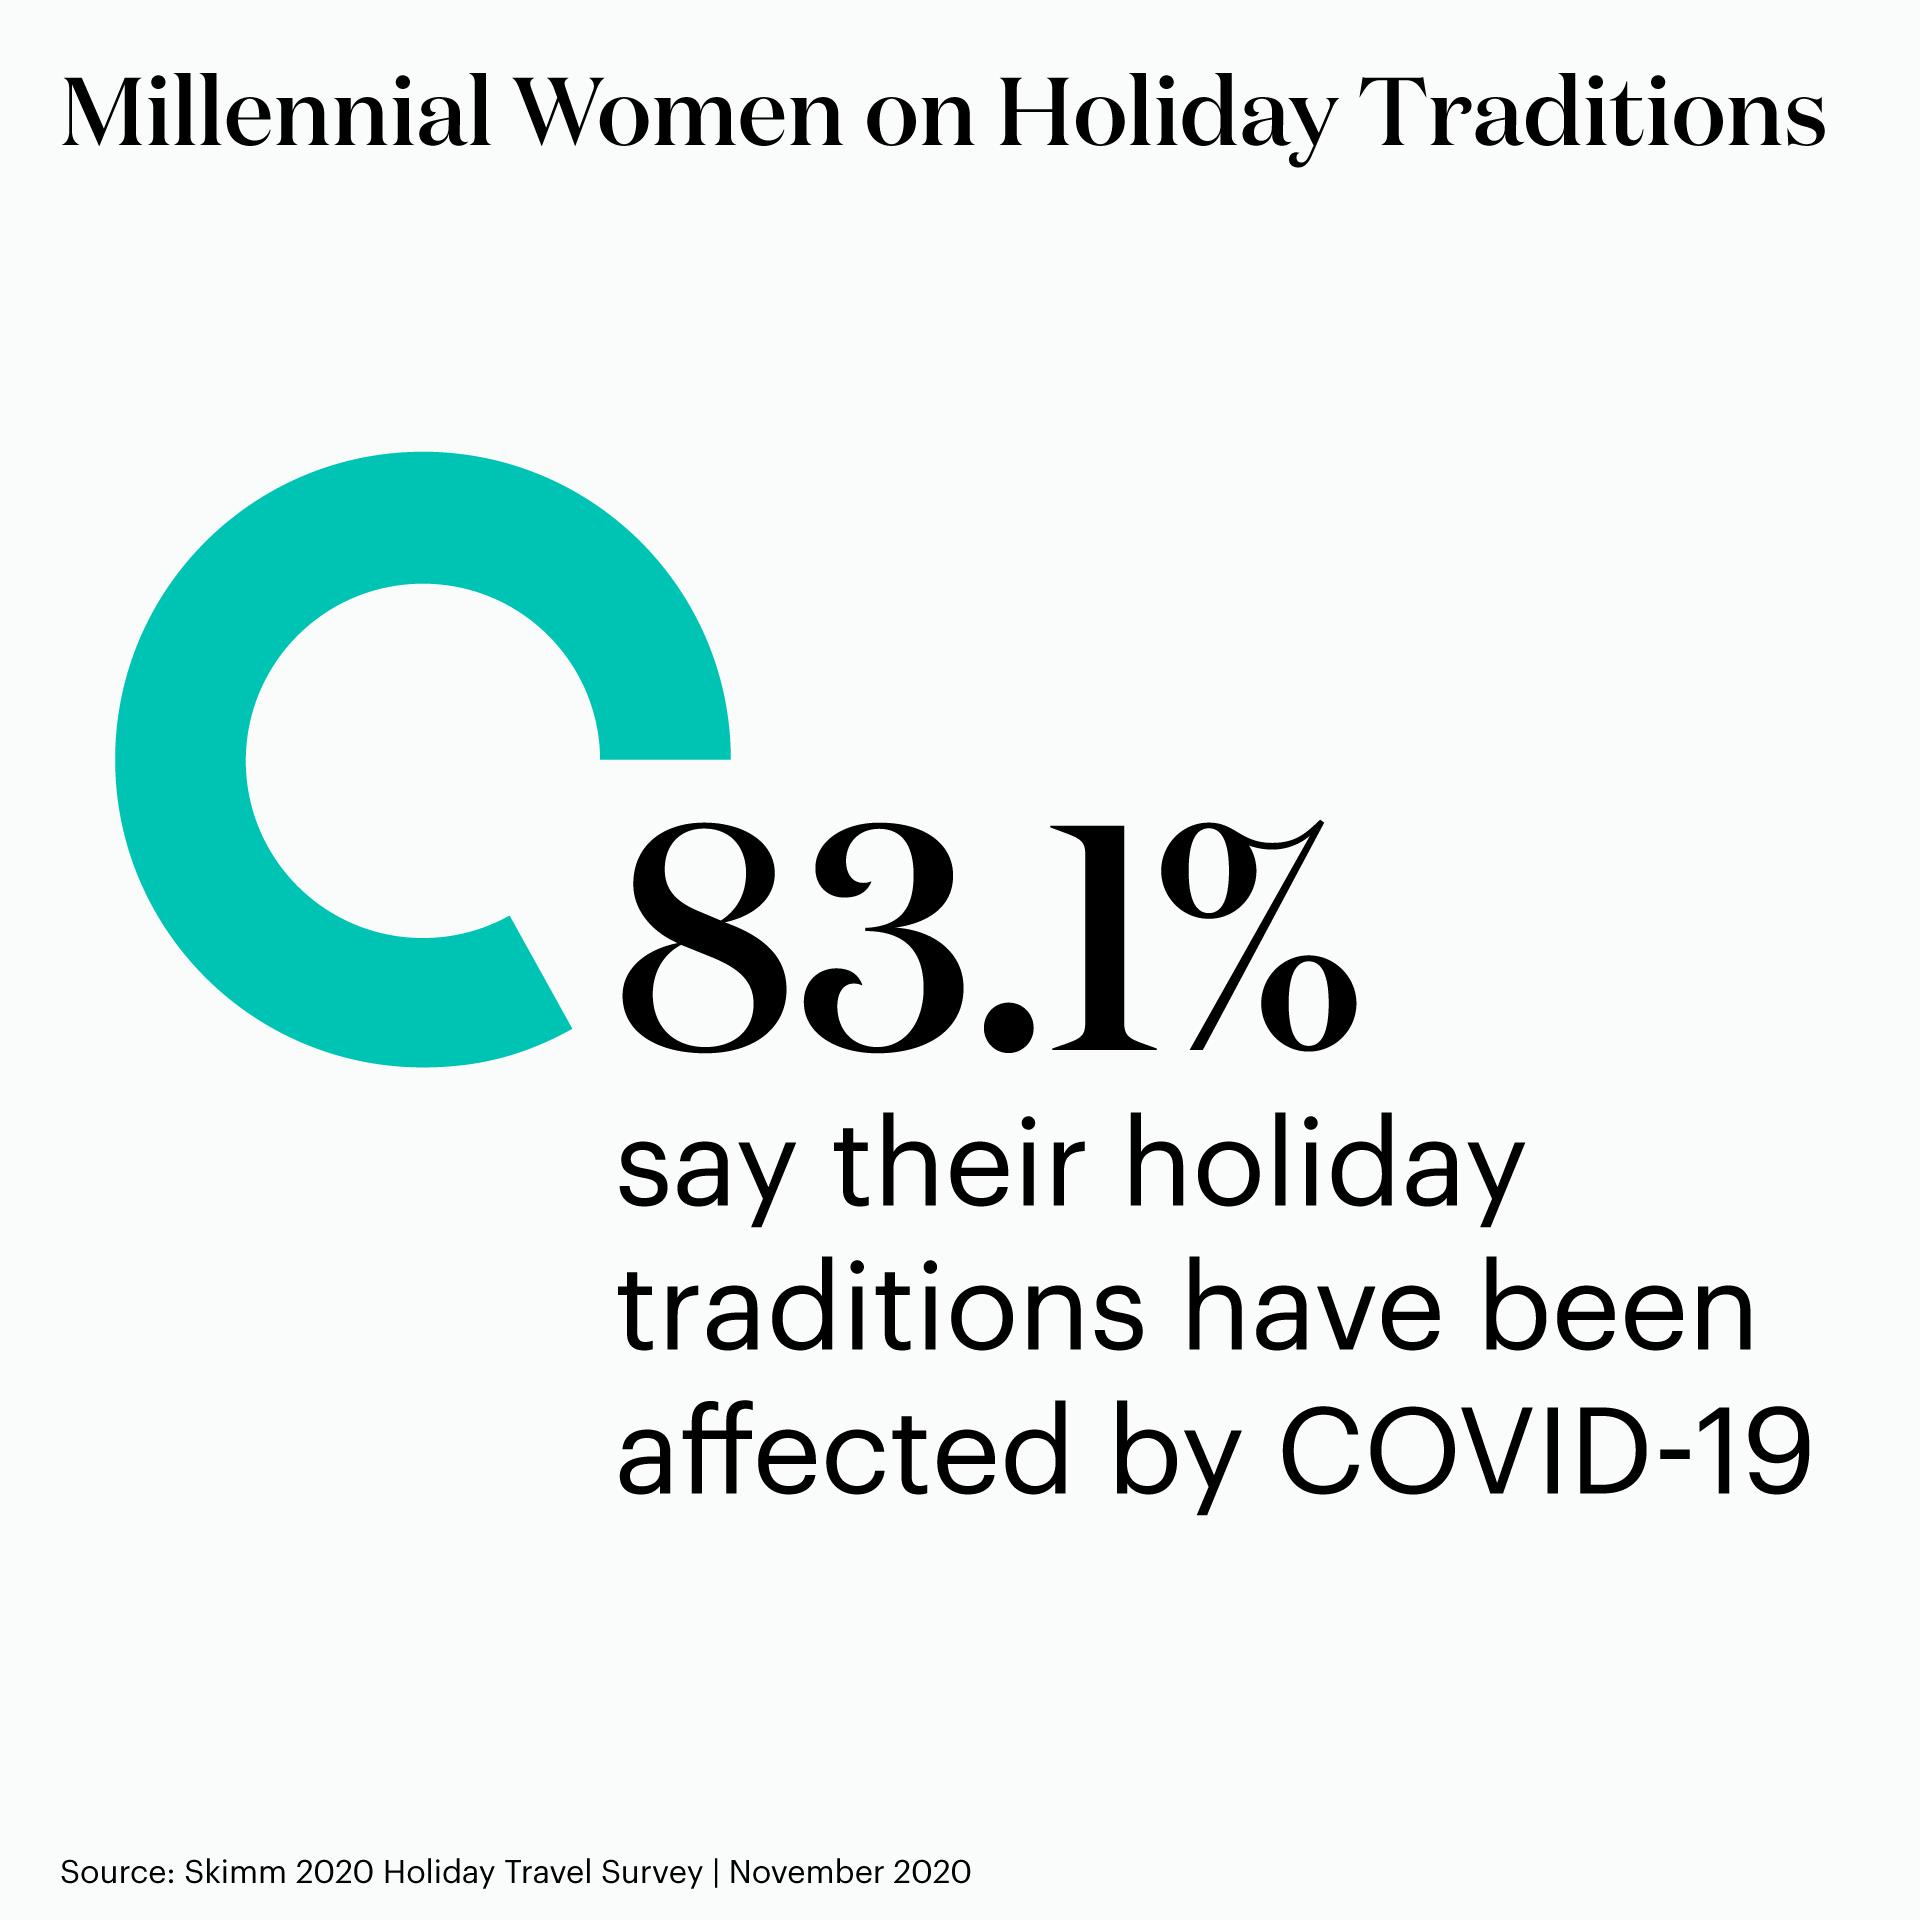 83.1% say their holiday traditions have been affected by COVID-19.